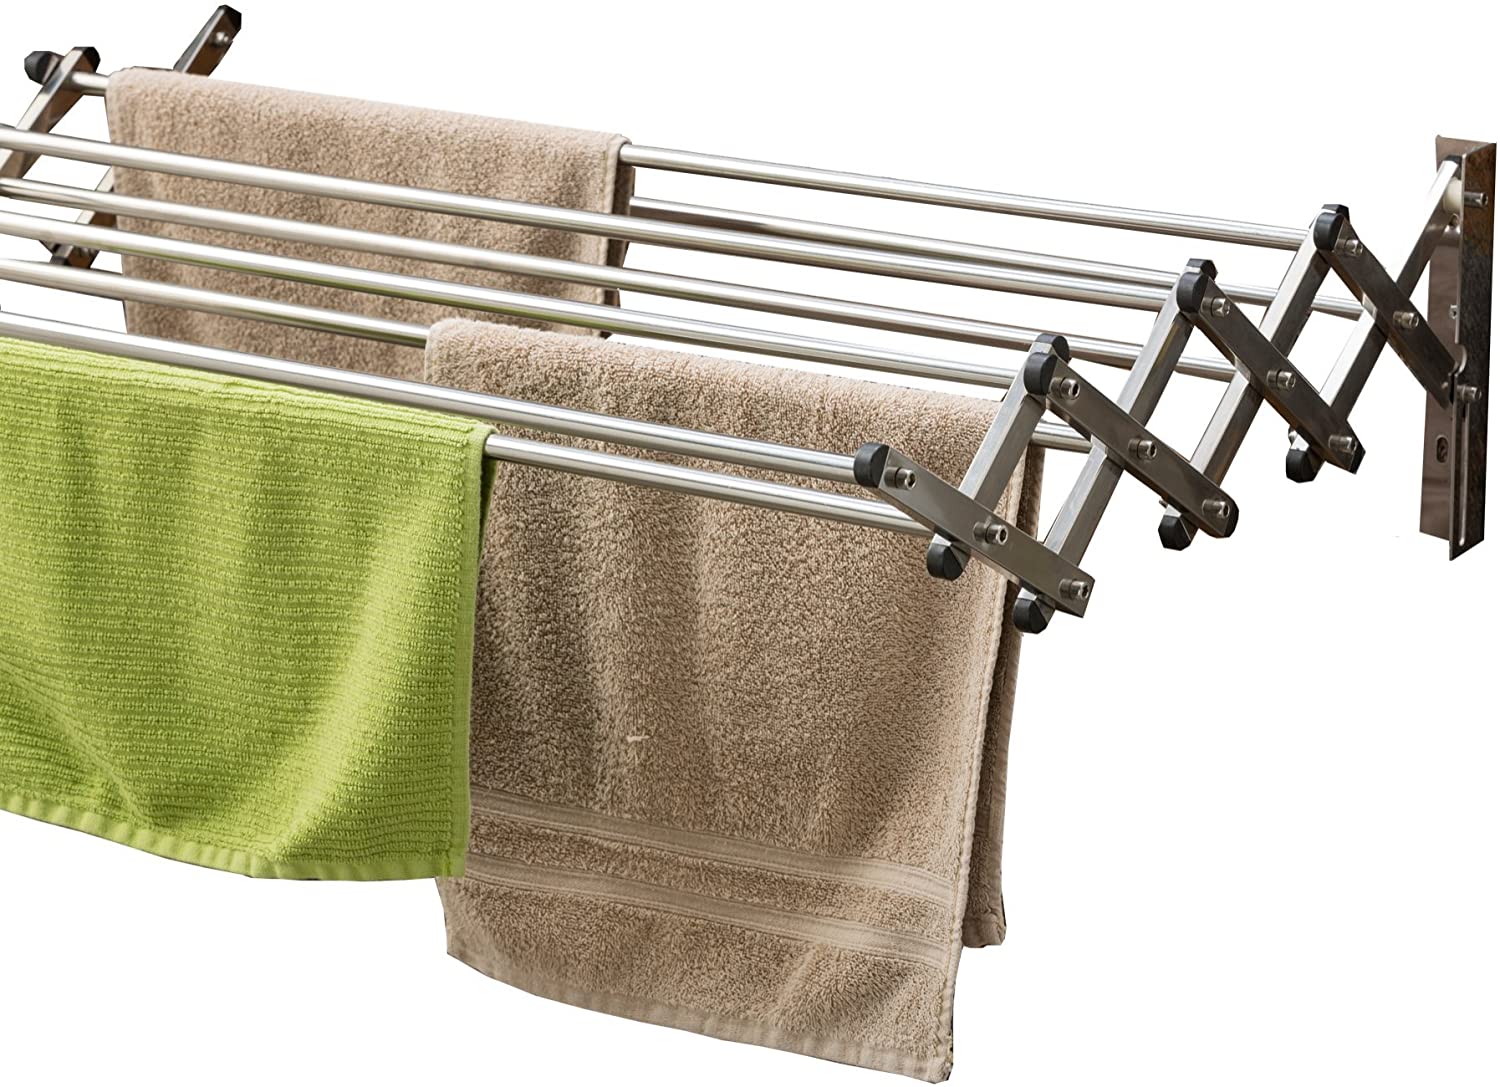 Sturdy stainless steel drying rack that can be collapsed